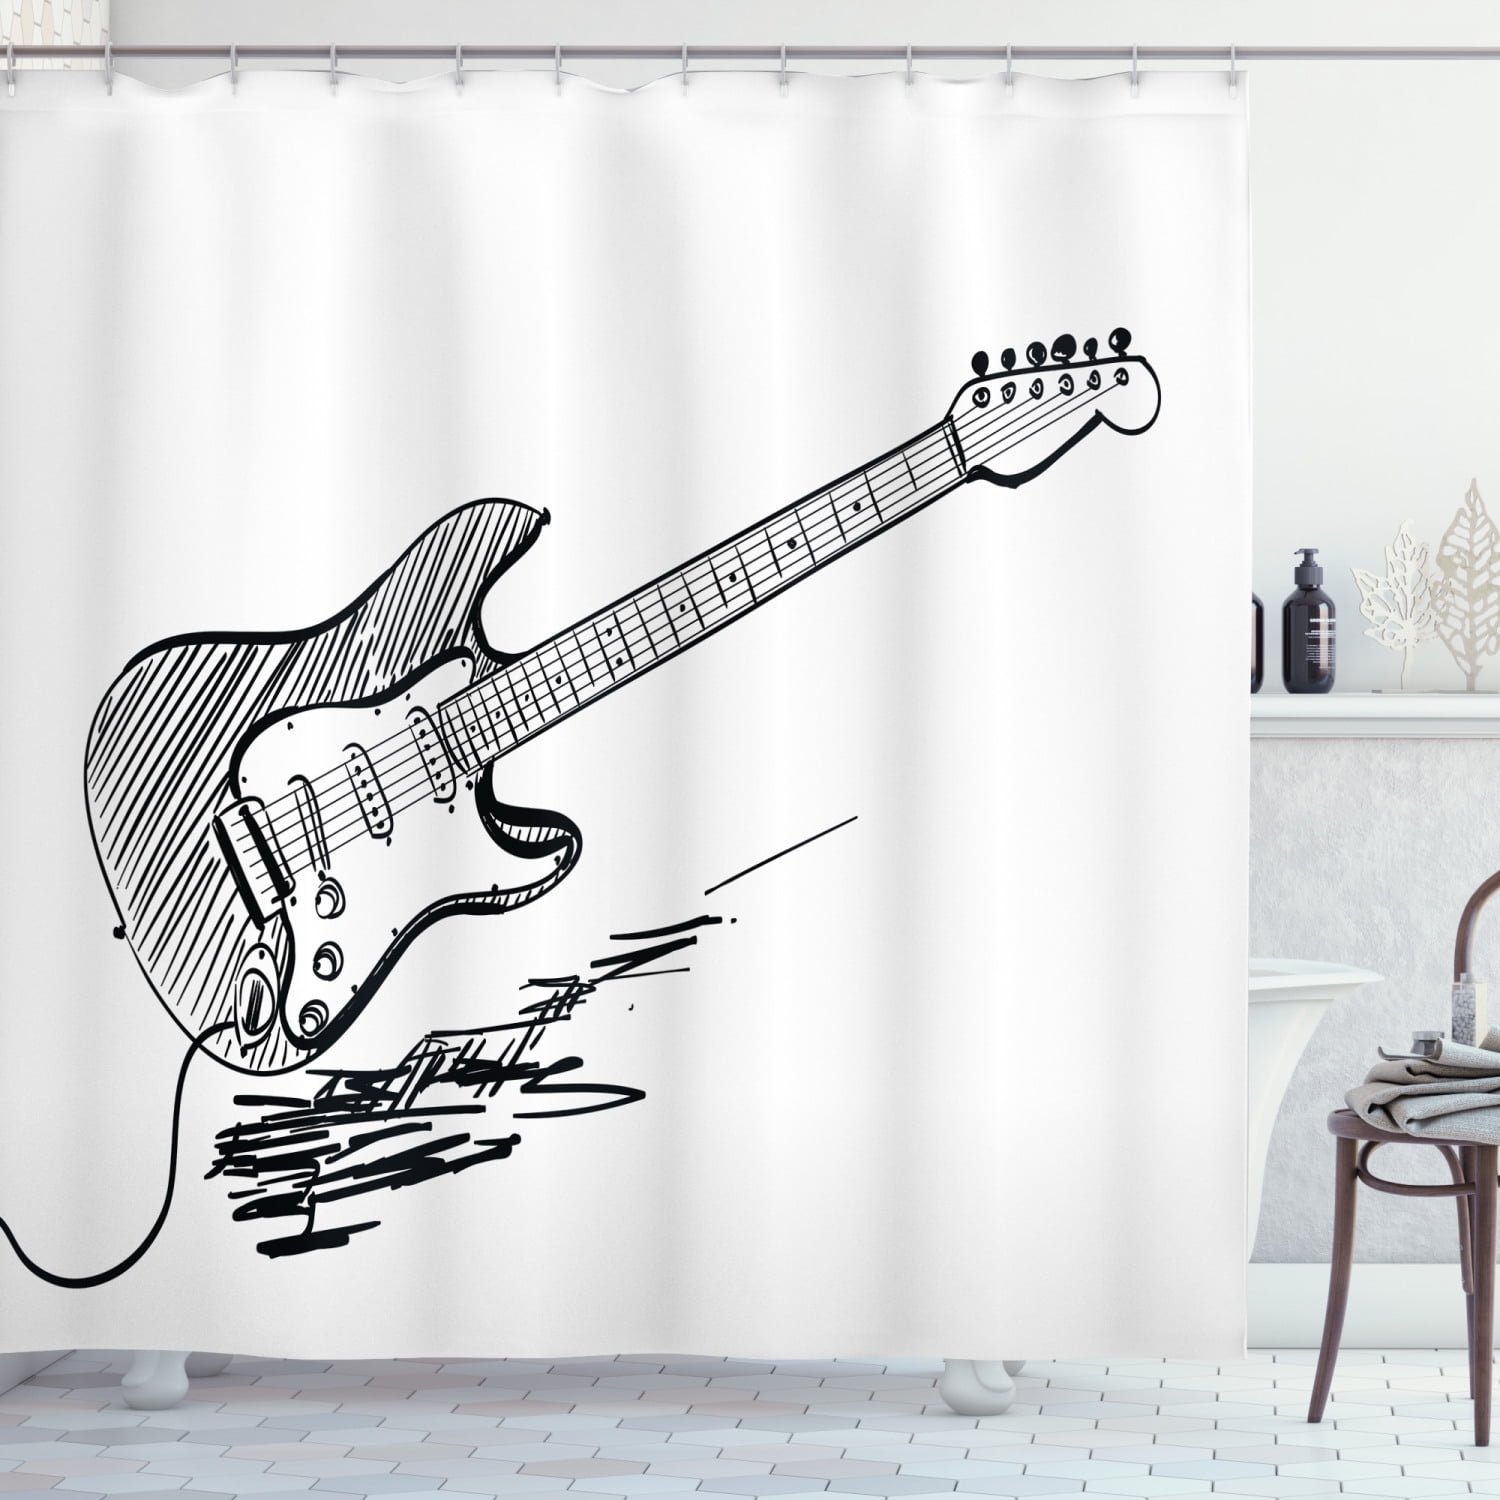 Music Shower Curtain set Guitar With Wooden Floor And Wall Bathroom Curtain 71" 